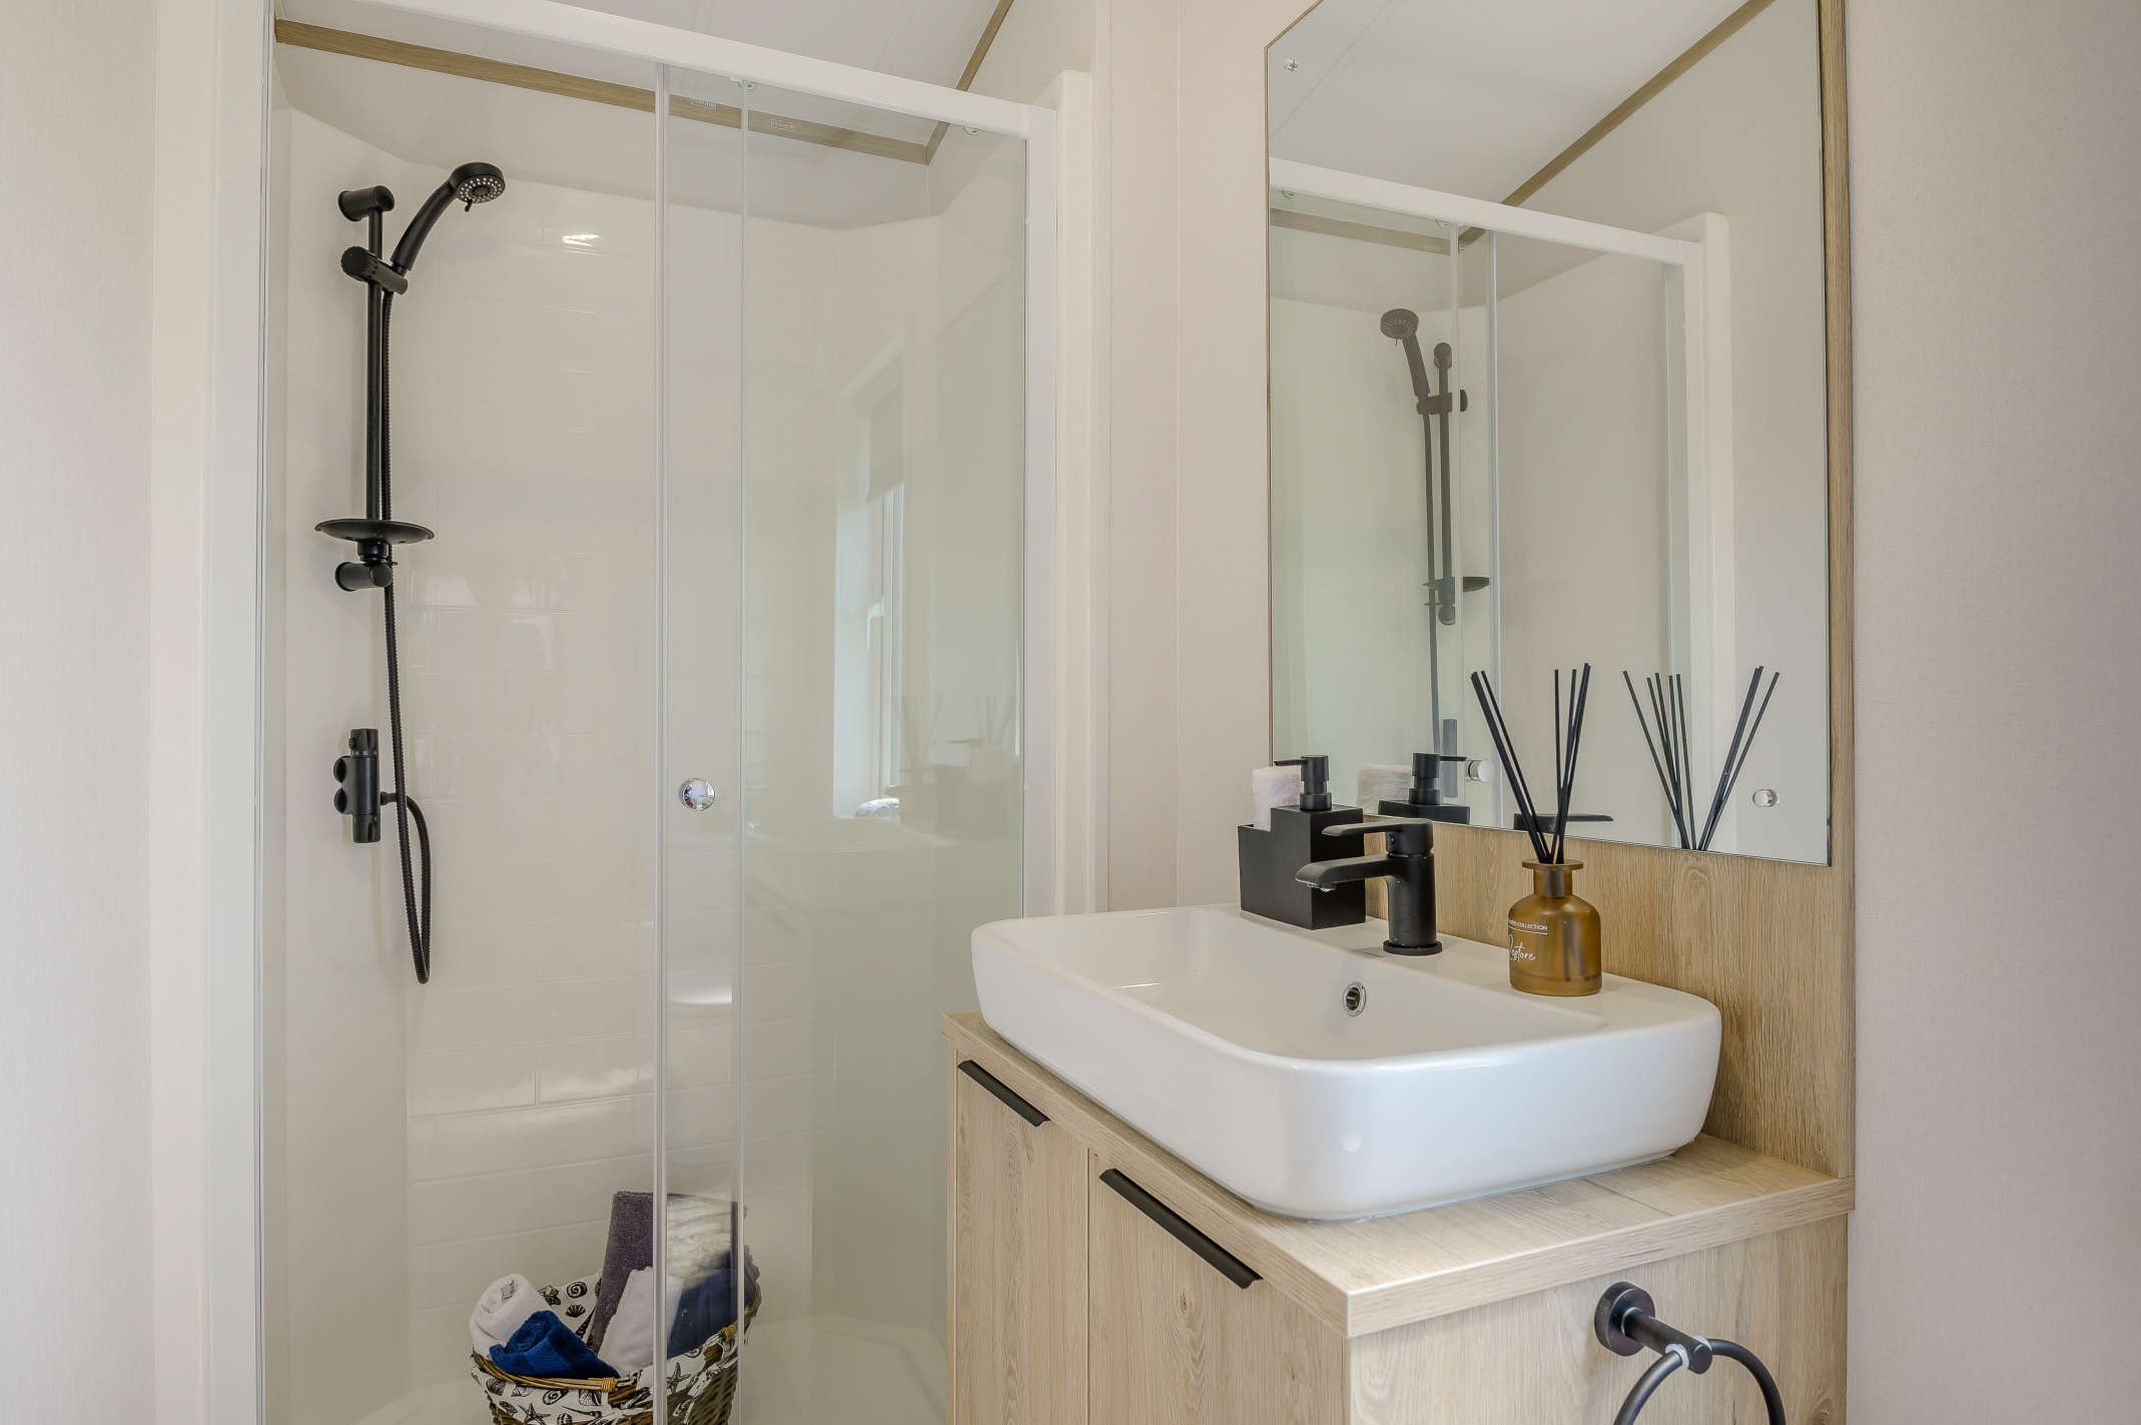 The Ensuite in the Master bedroom complete with Shower, Basin and WC